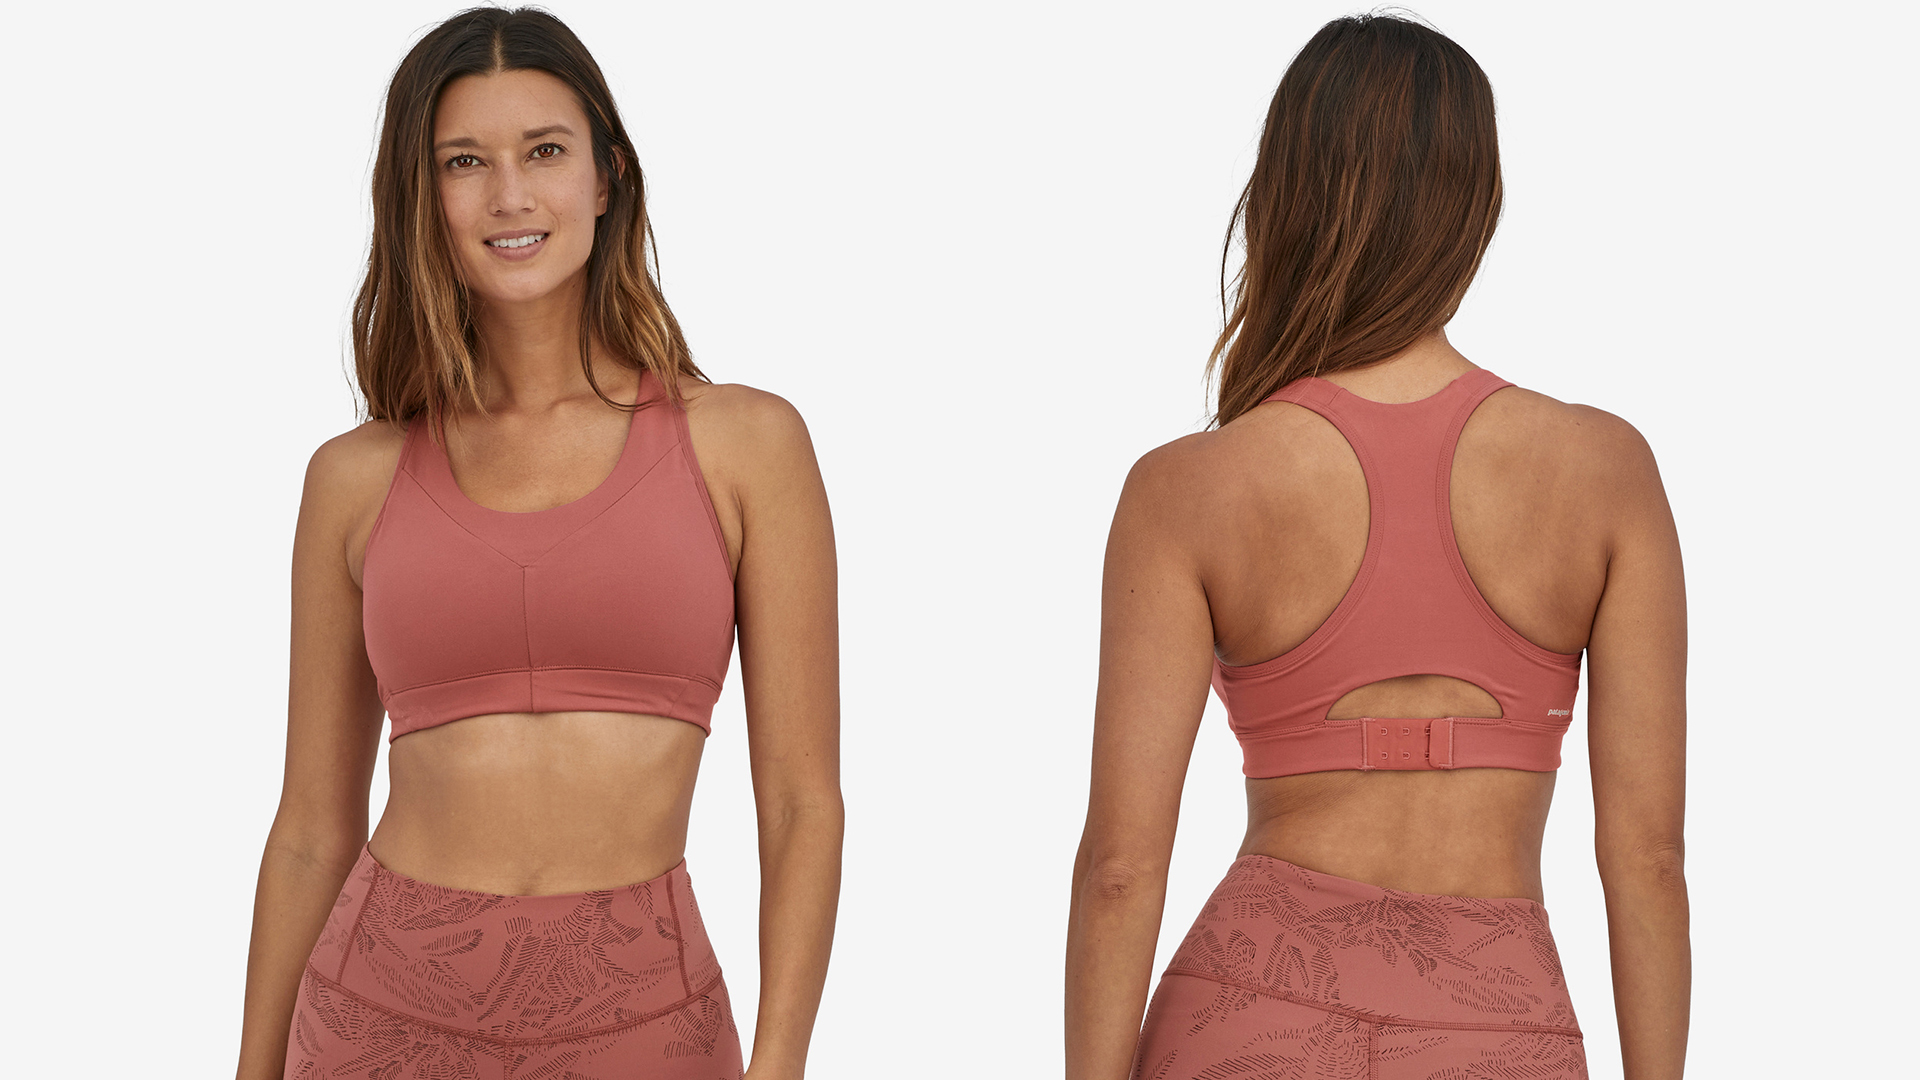 Shock Absorber Active Shaped Sports Bra Review - Outdoor Gear - Wilderness  Magazine